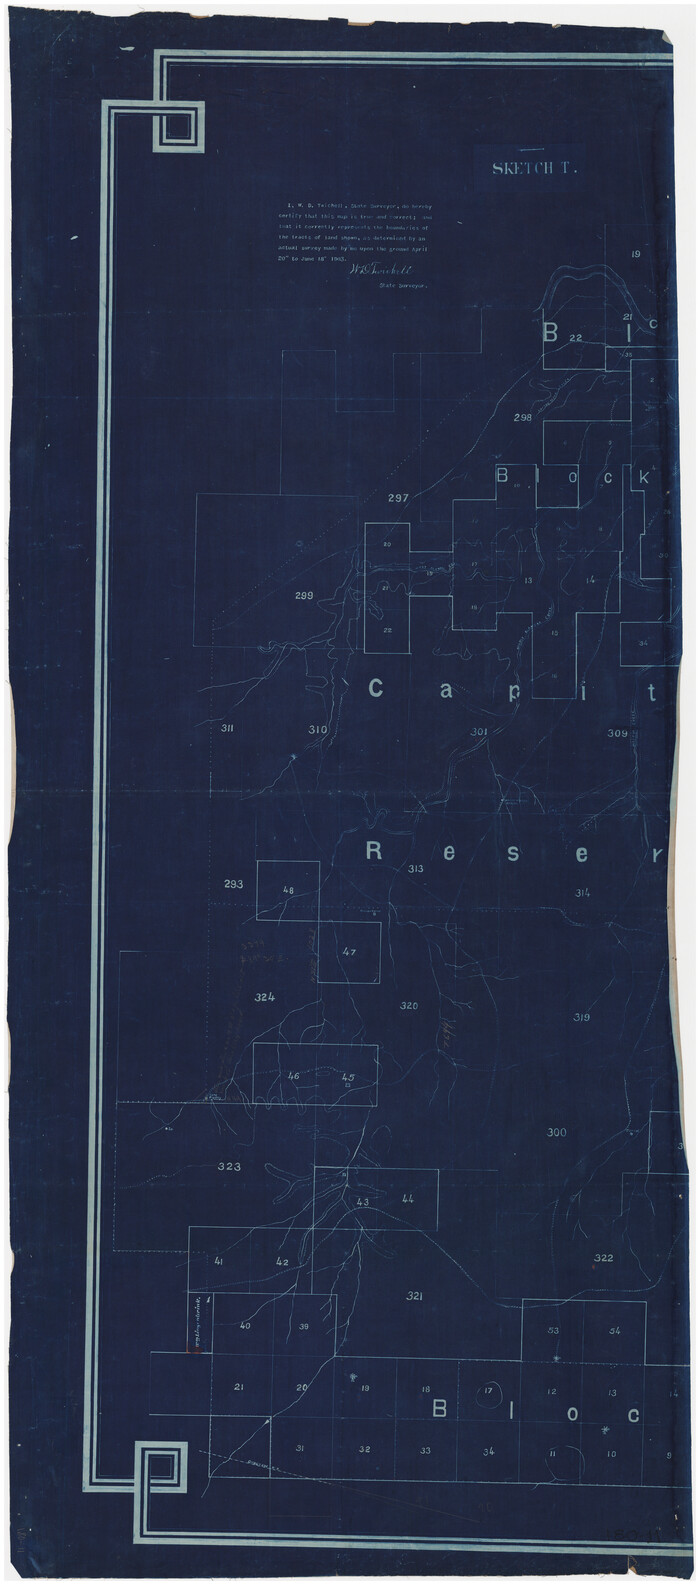 89631, Sketch T [showing Capitol Reserve], Twichell Survey Records